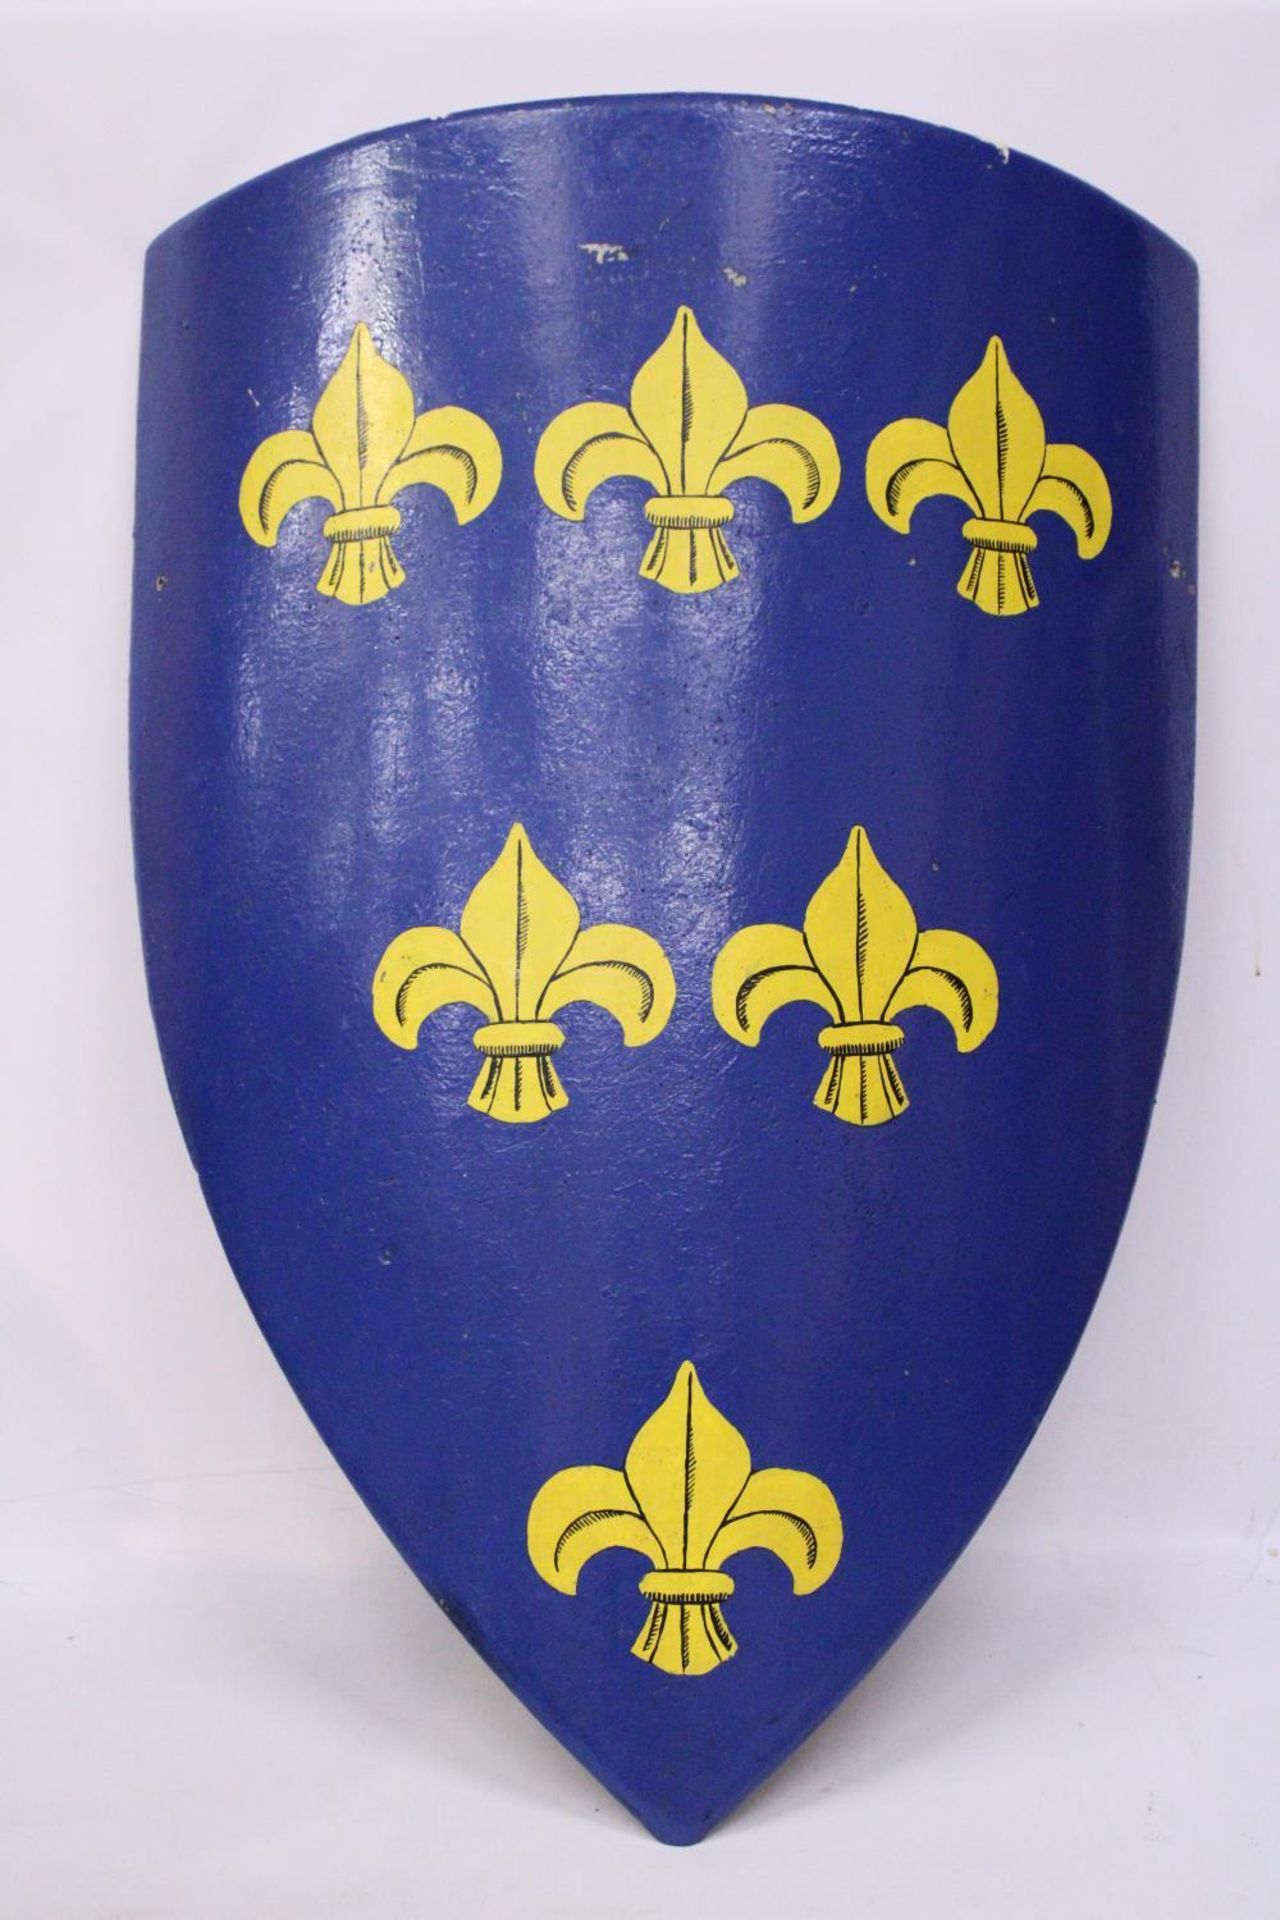 A LARGE VINTAGE HAND PAINTED WALL SHIELD, HEIGHT 106CM. THE SHIELD WITH BLUE BACKGROUND WITH SIX